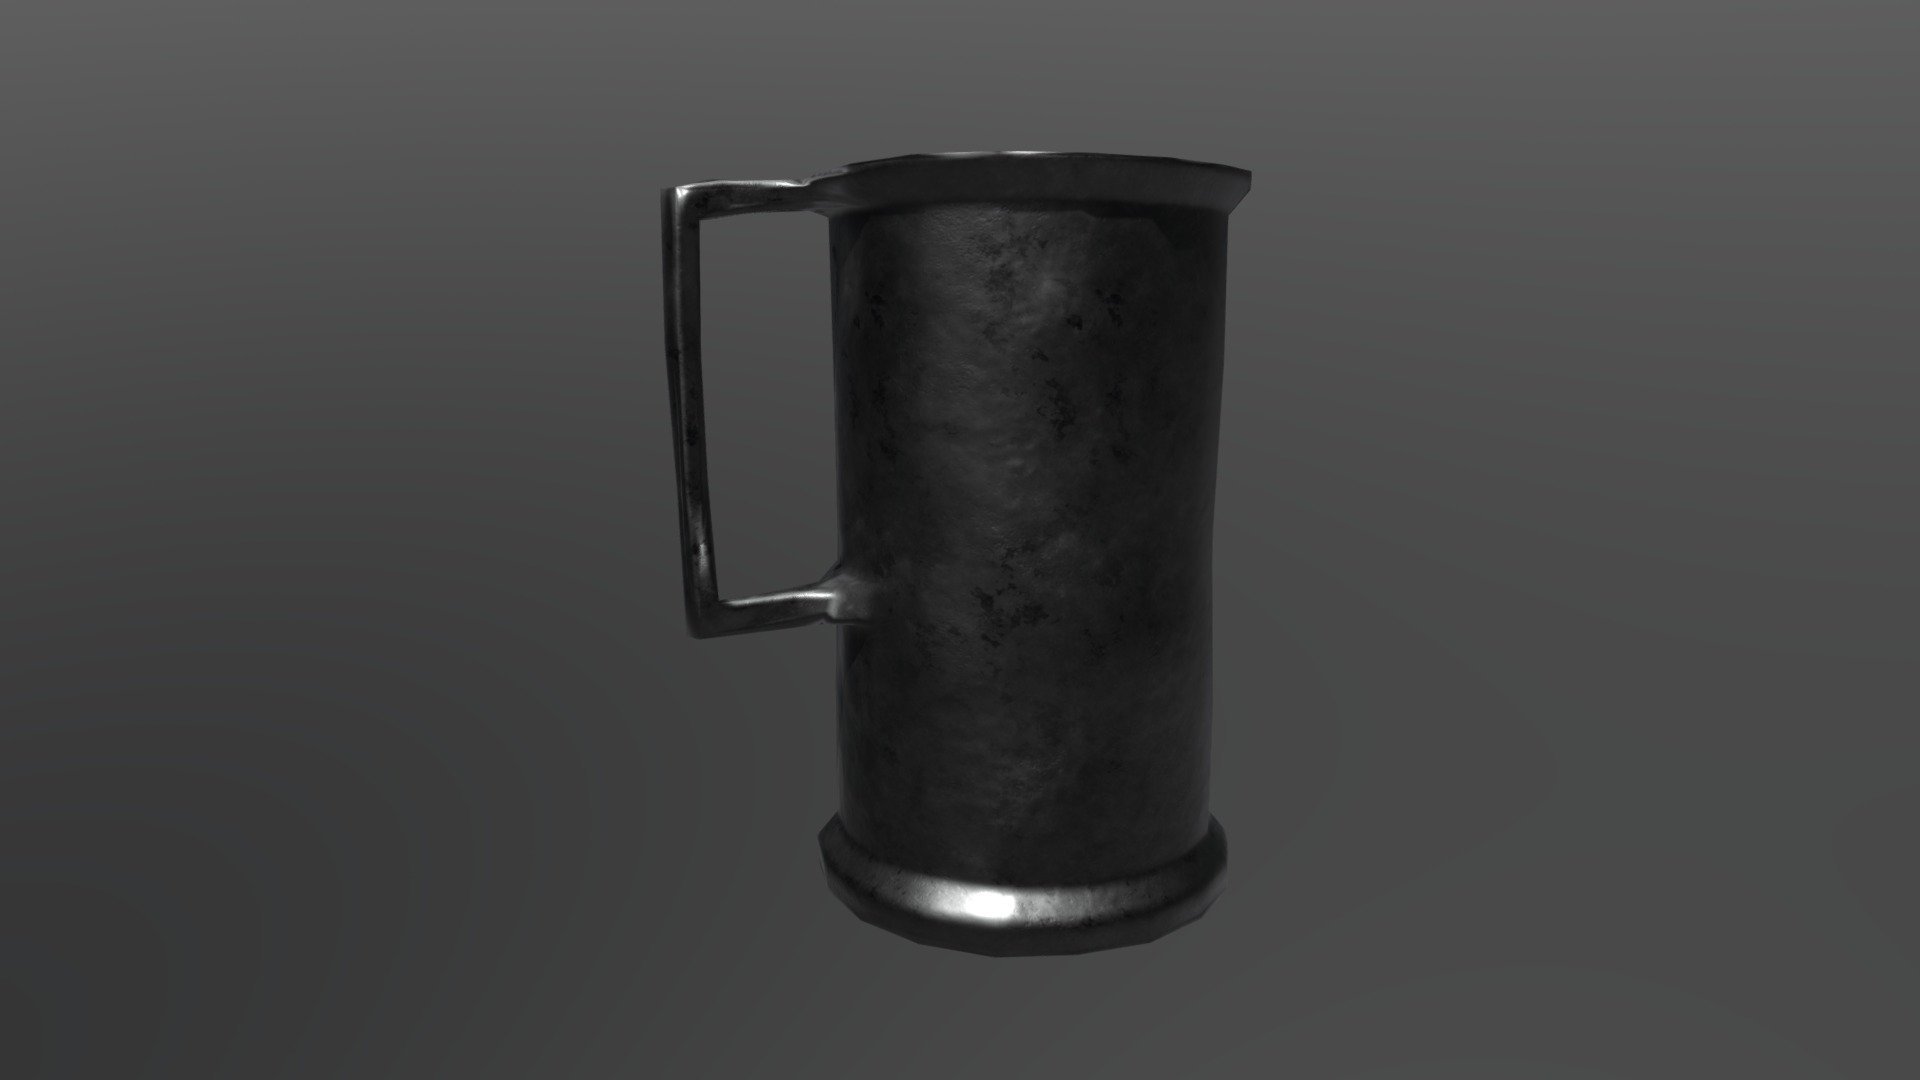 3D model Metal Cup FBX - This is a 3D model of the Metal Cup FBX. The 3D model is about a glass mug with a handle.